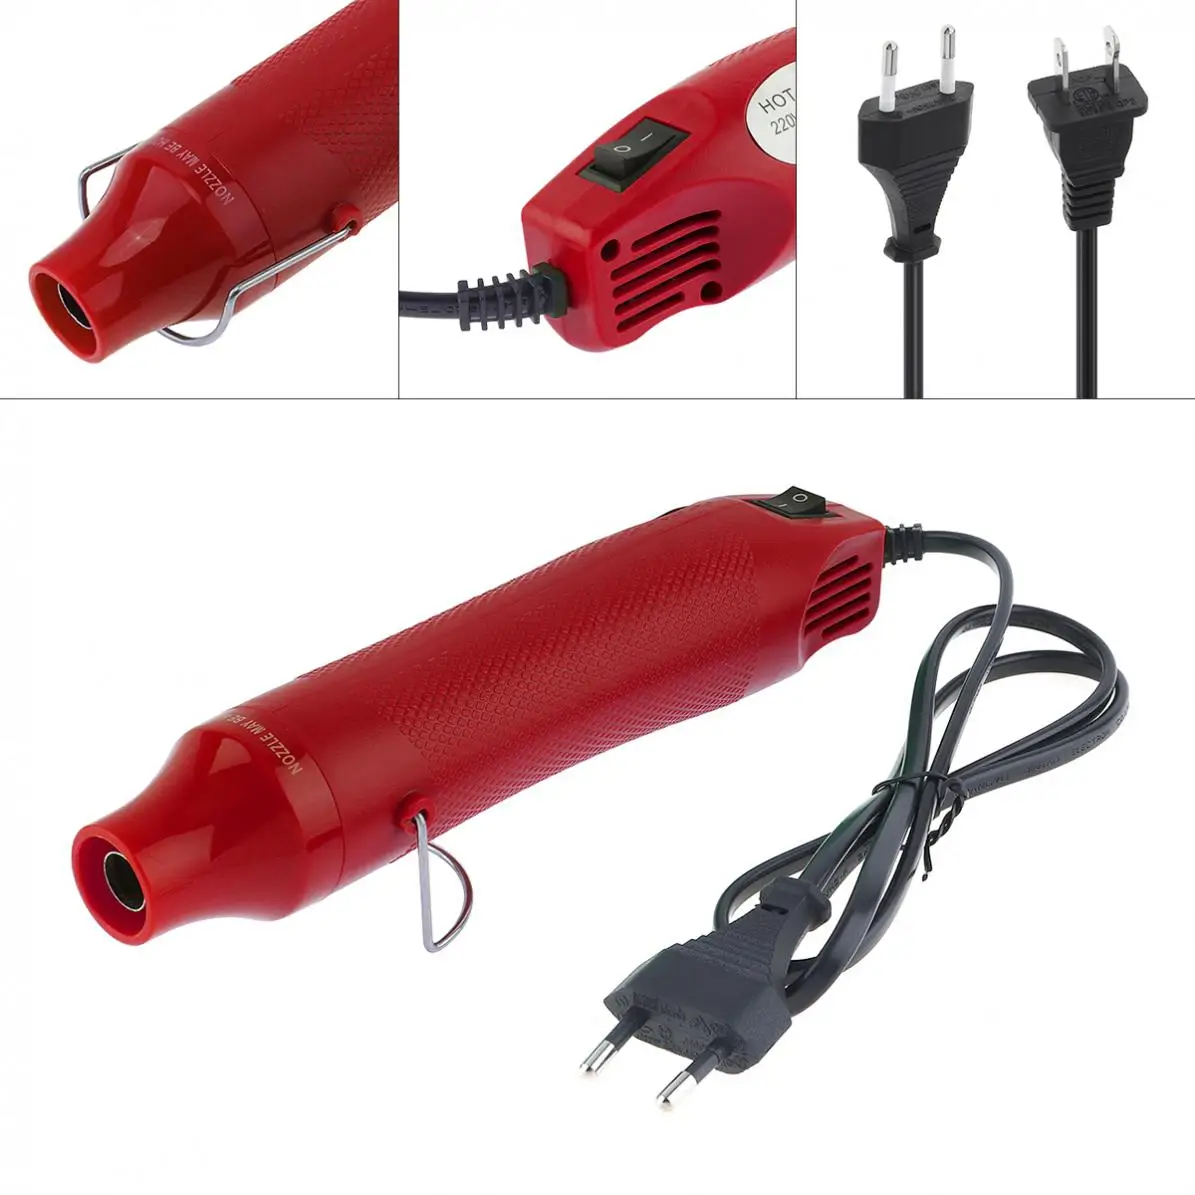 110V / 220V 300W Heat Gun Hot Air Electric Blower with Shrink Plastic Surface EU US Plug for Heating DIY Accessories 3500w 16a digital plug in temperature controller intelligent high accuracy heating cooling ntc sensor ac110 220v lcd thermostat